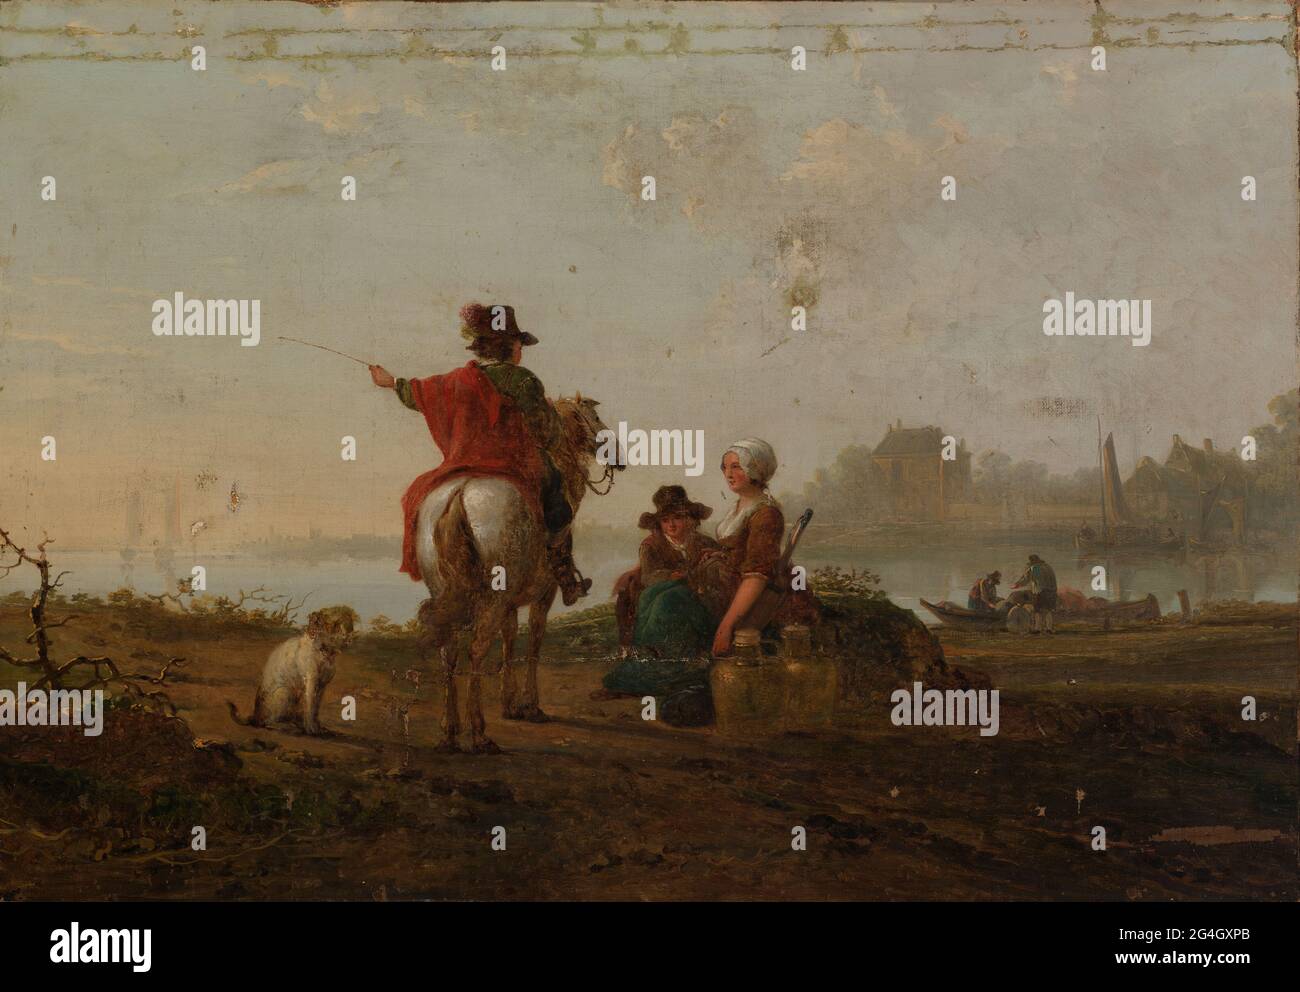 Dutch Landscape with Figures, late 18th-early 19th century. Stock Photo